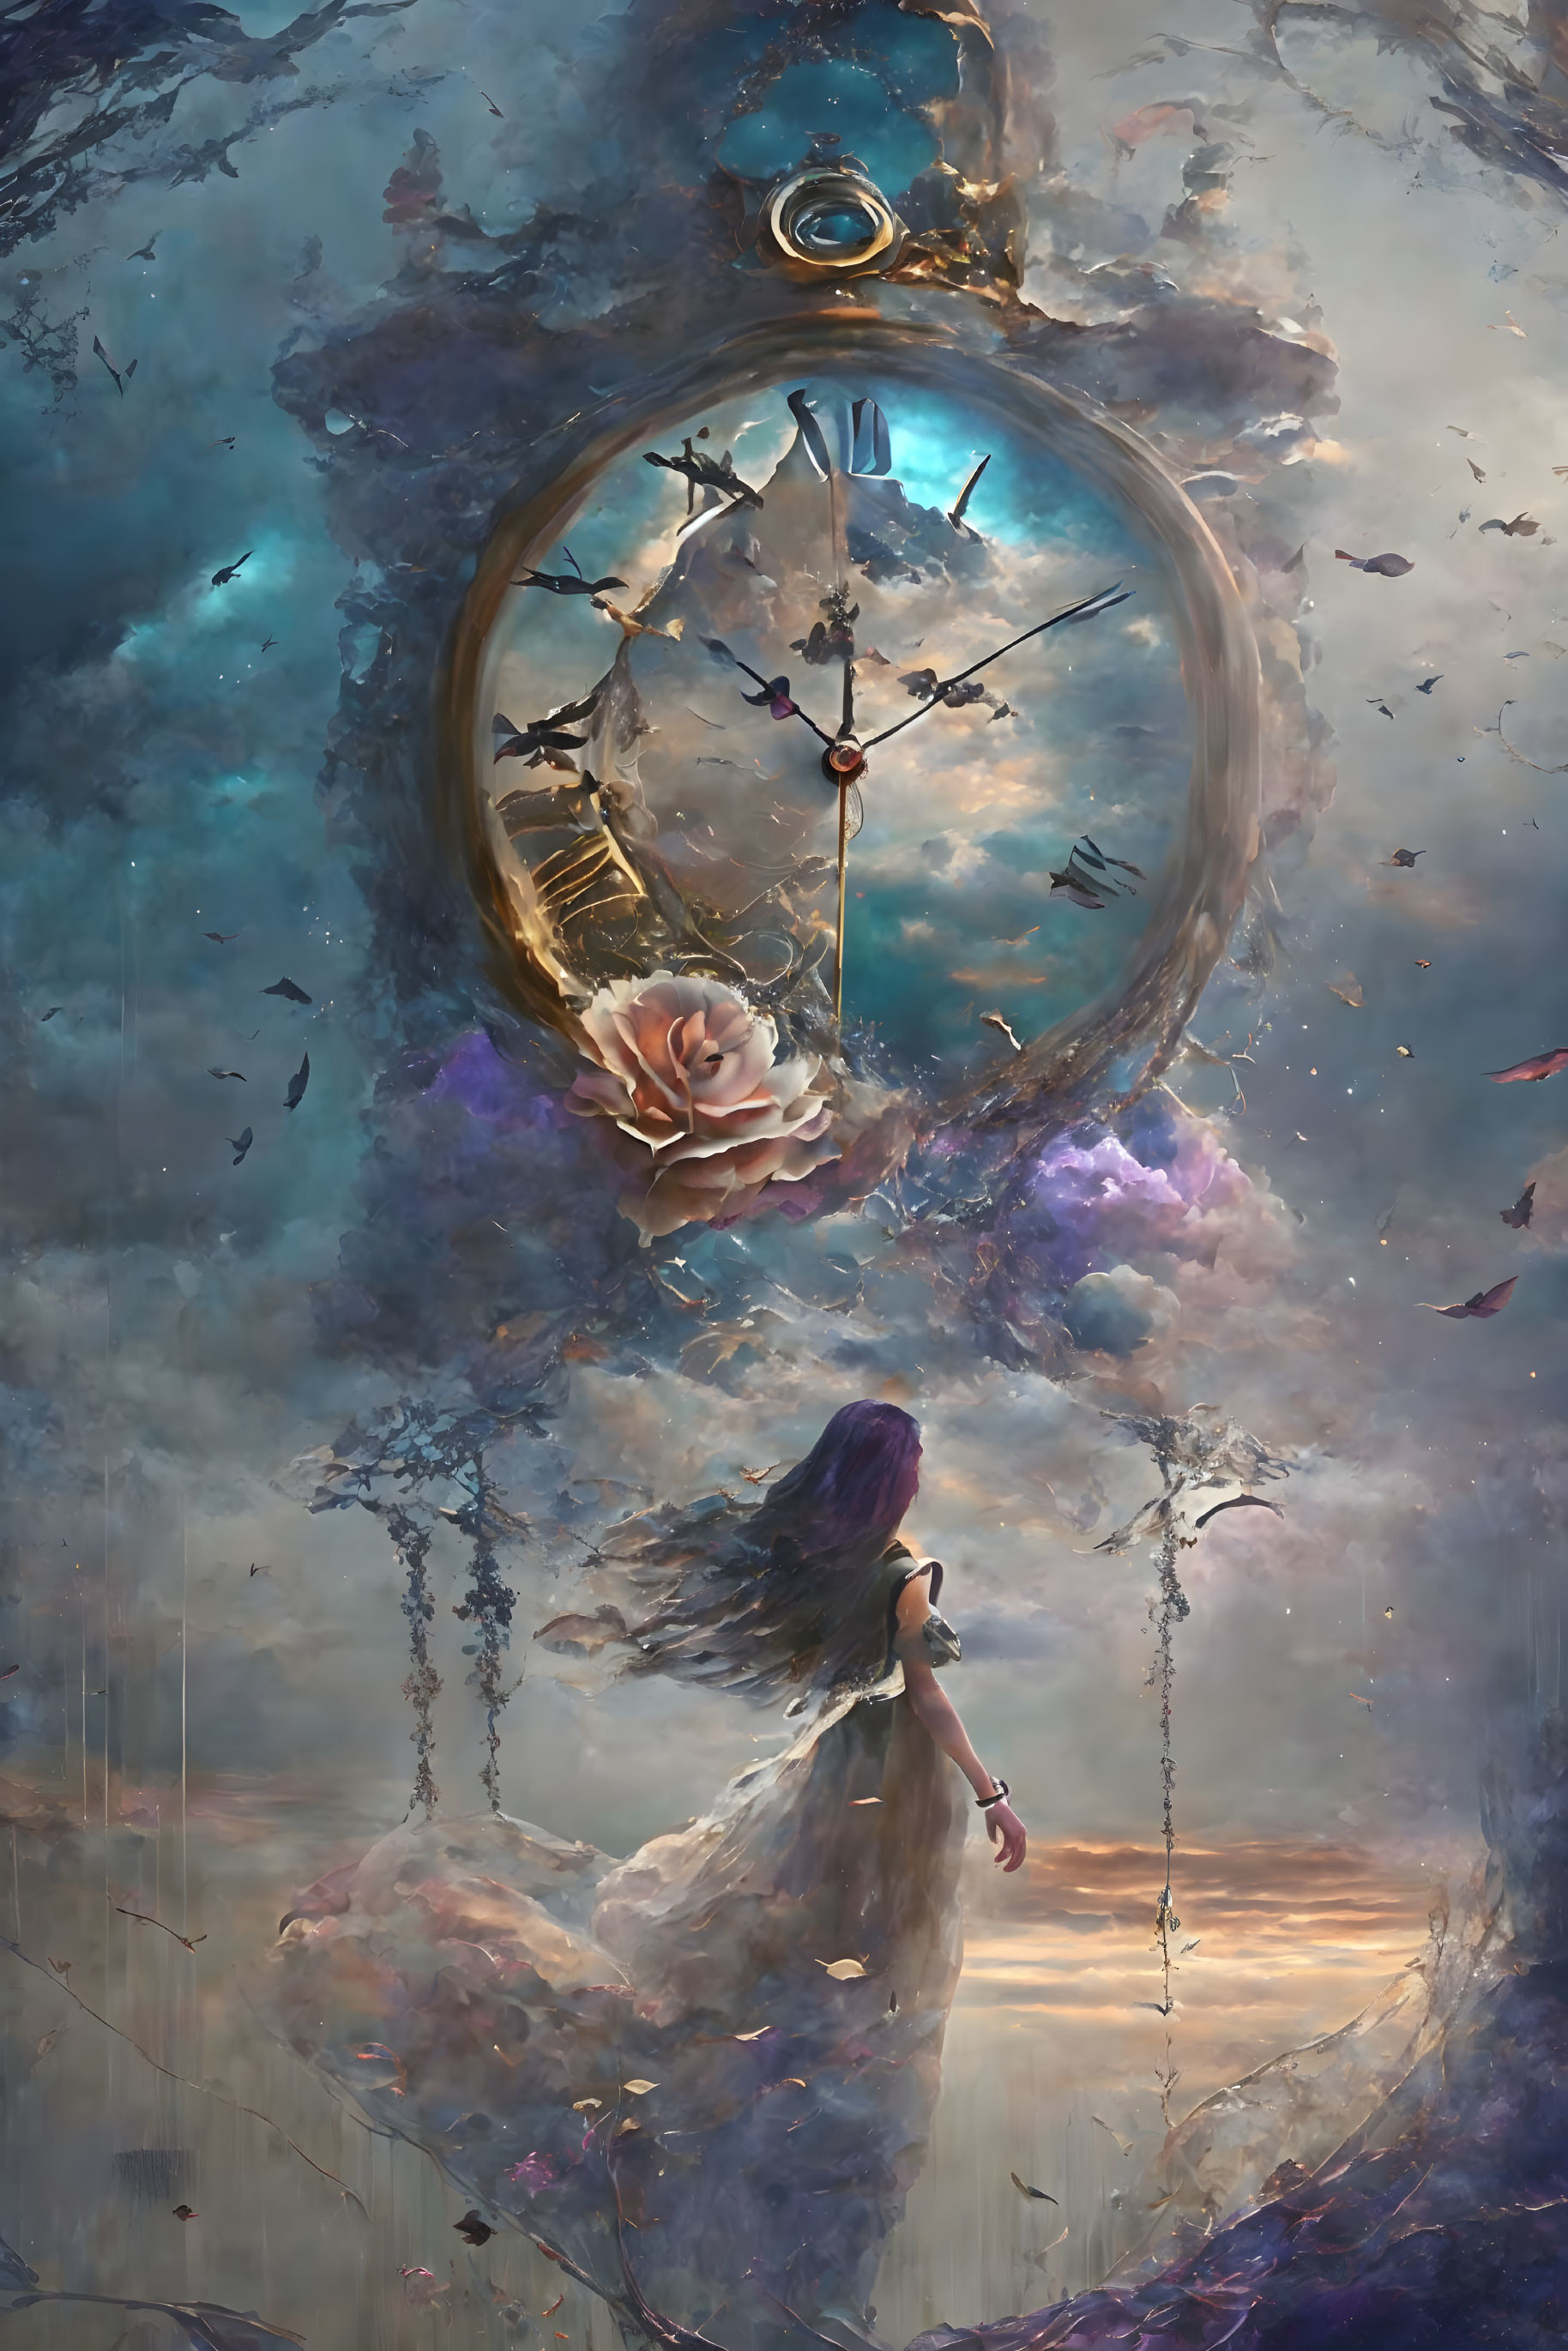 Woman in flowing dress gazes at large floating pocket watch with rose, against surreal cloudy backdrop.